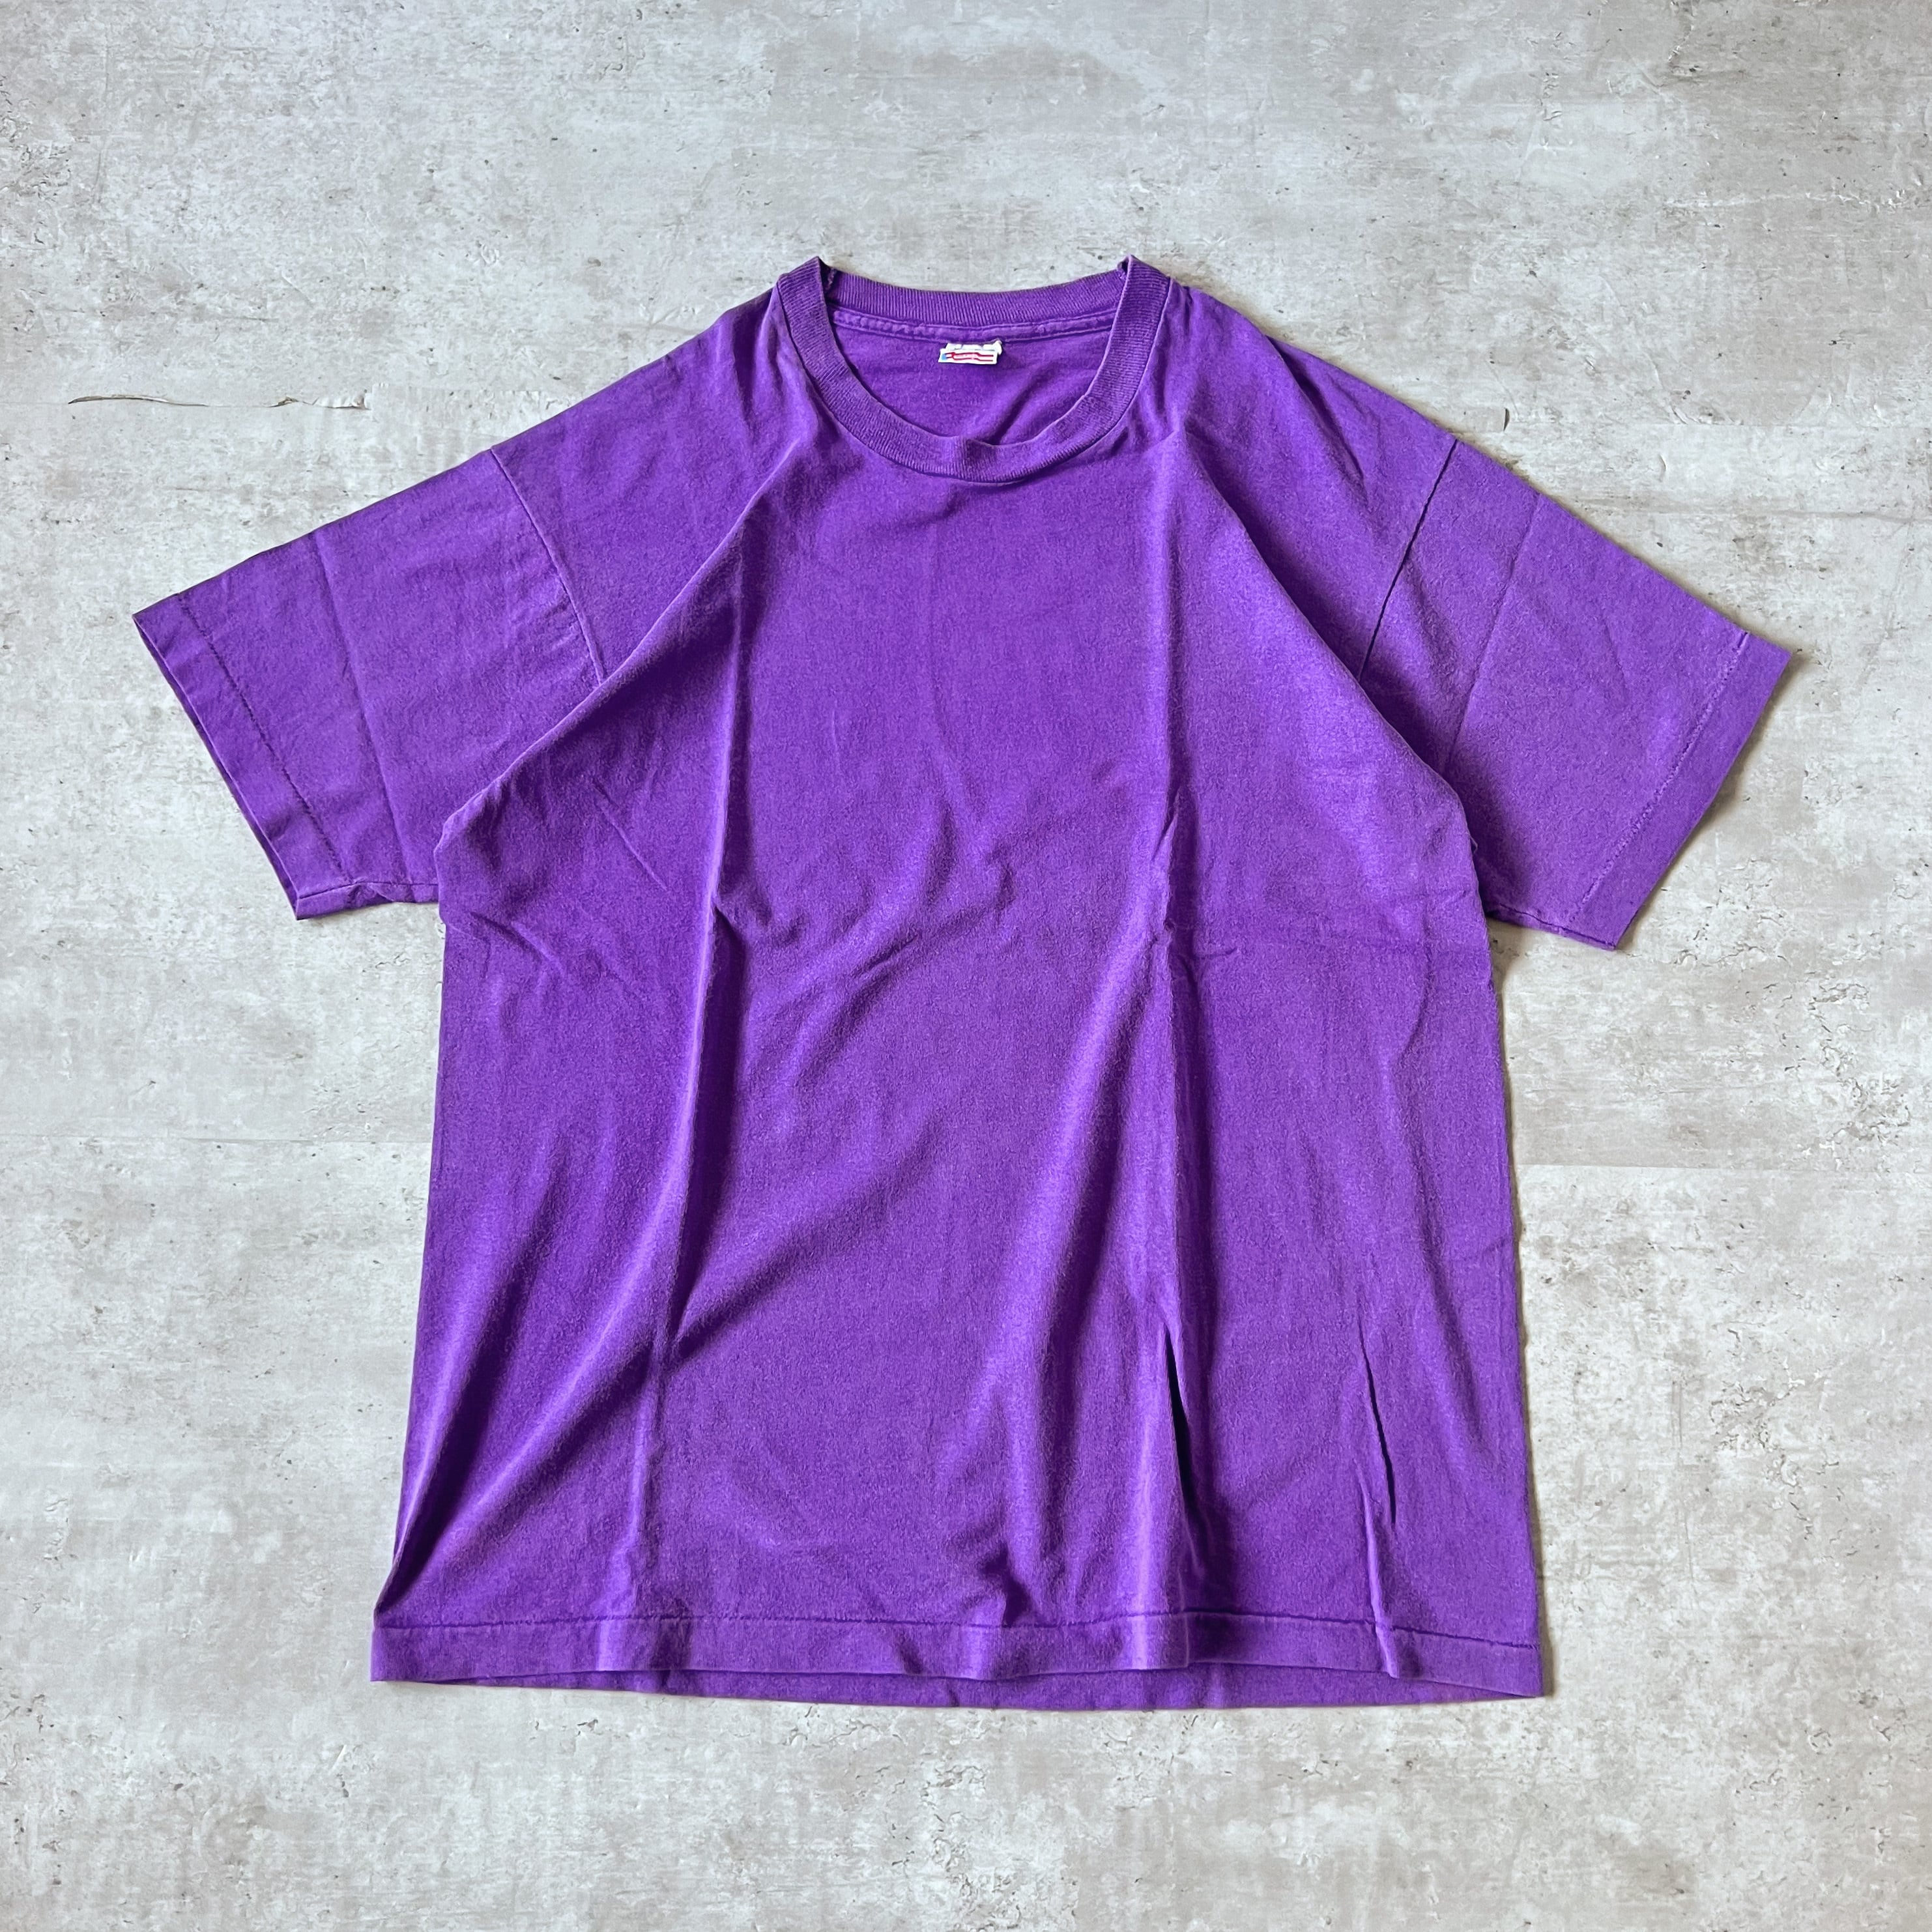 90s “FRUIT OF THE ROOM” XL size made in usa purple color plain Tee